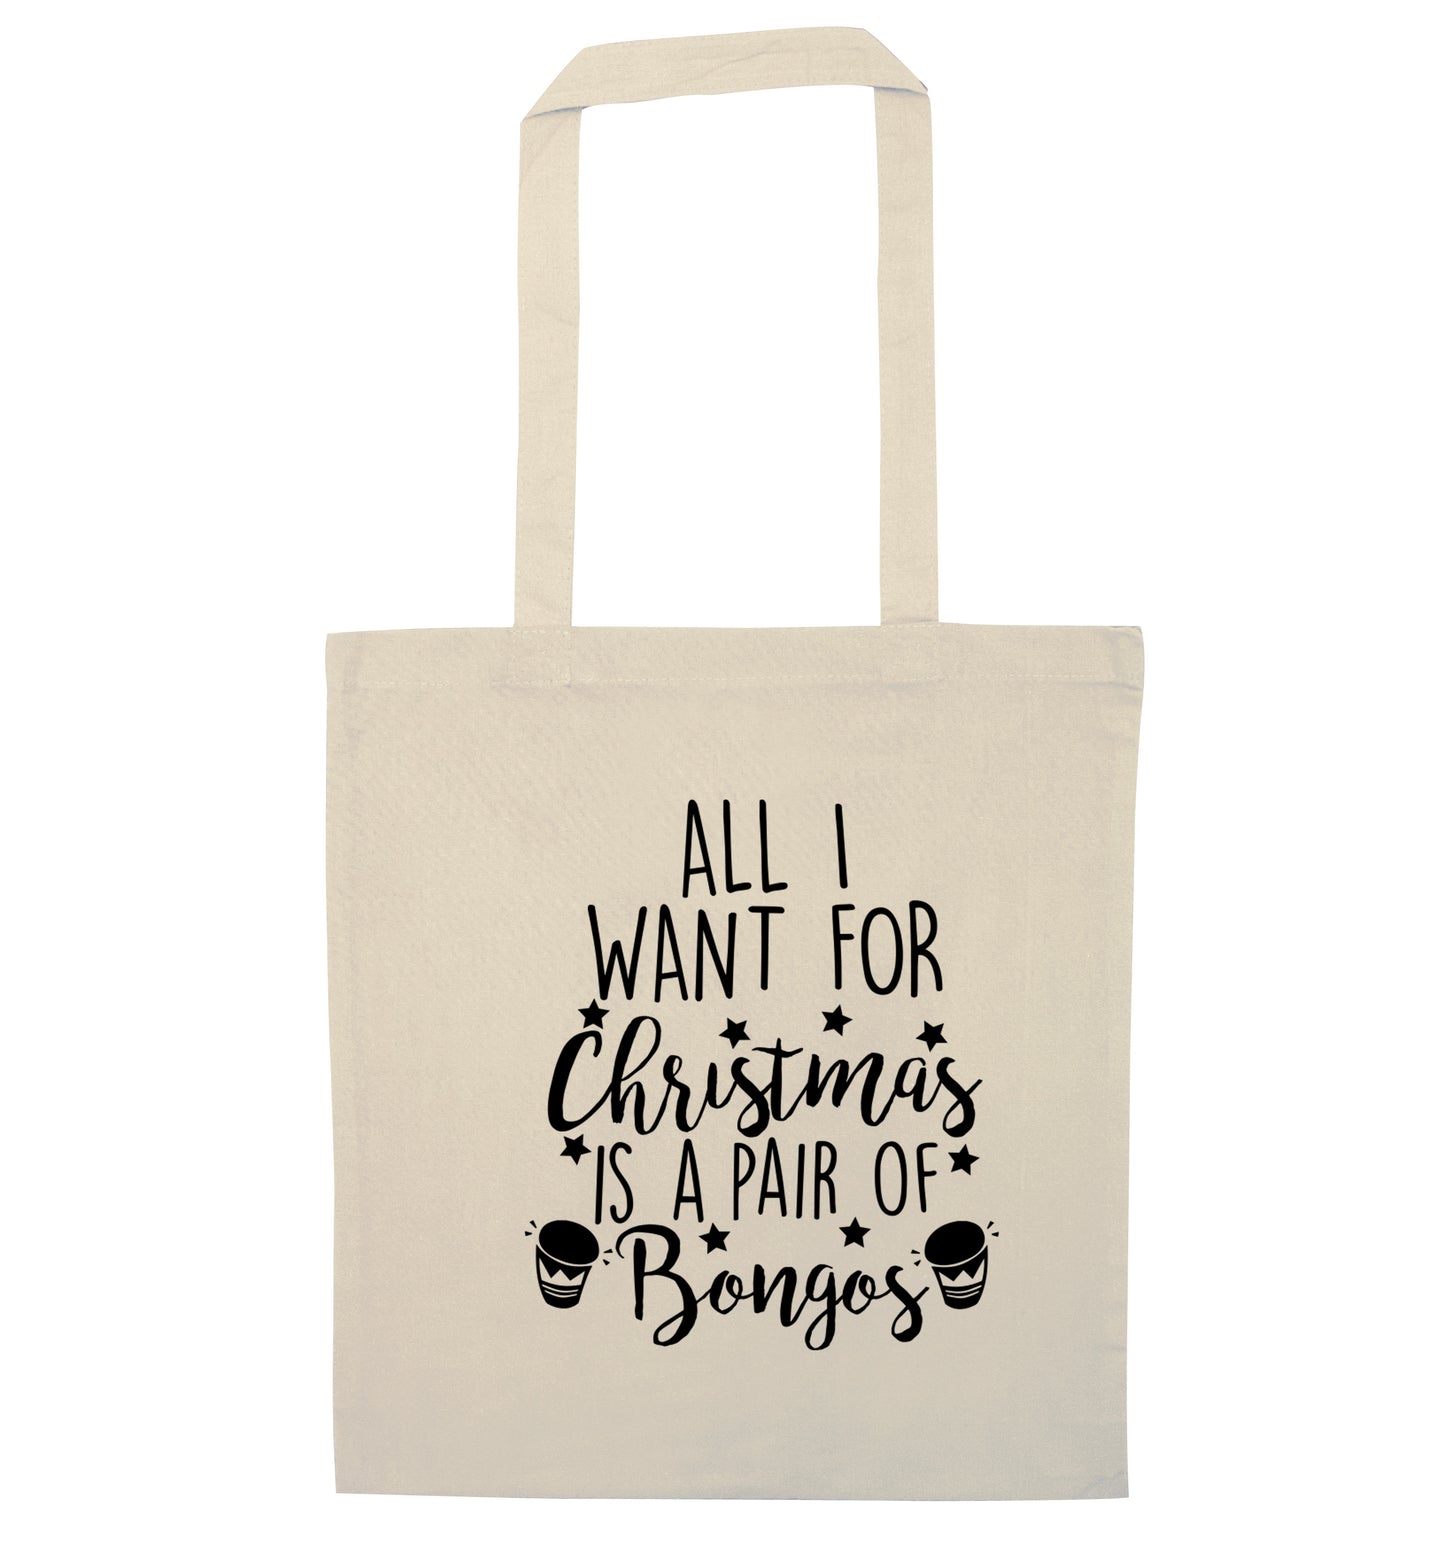 All I want for Christmas is a pair of bongos! natural tote bag